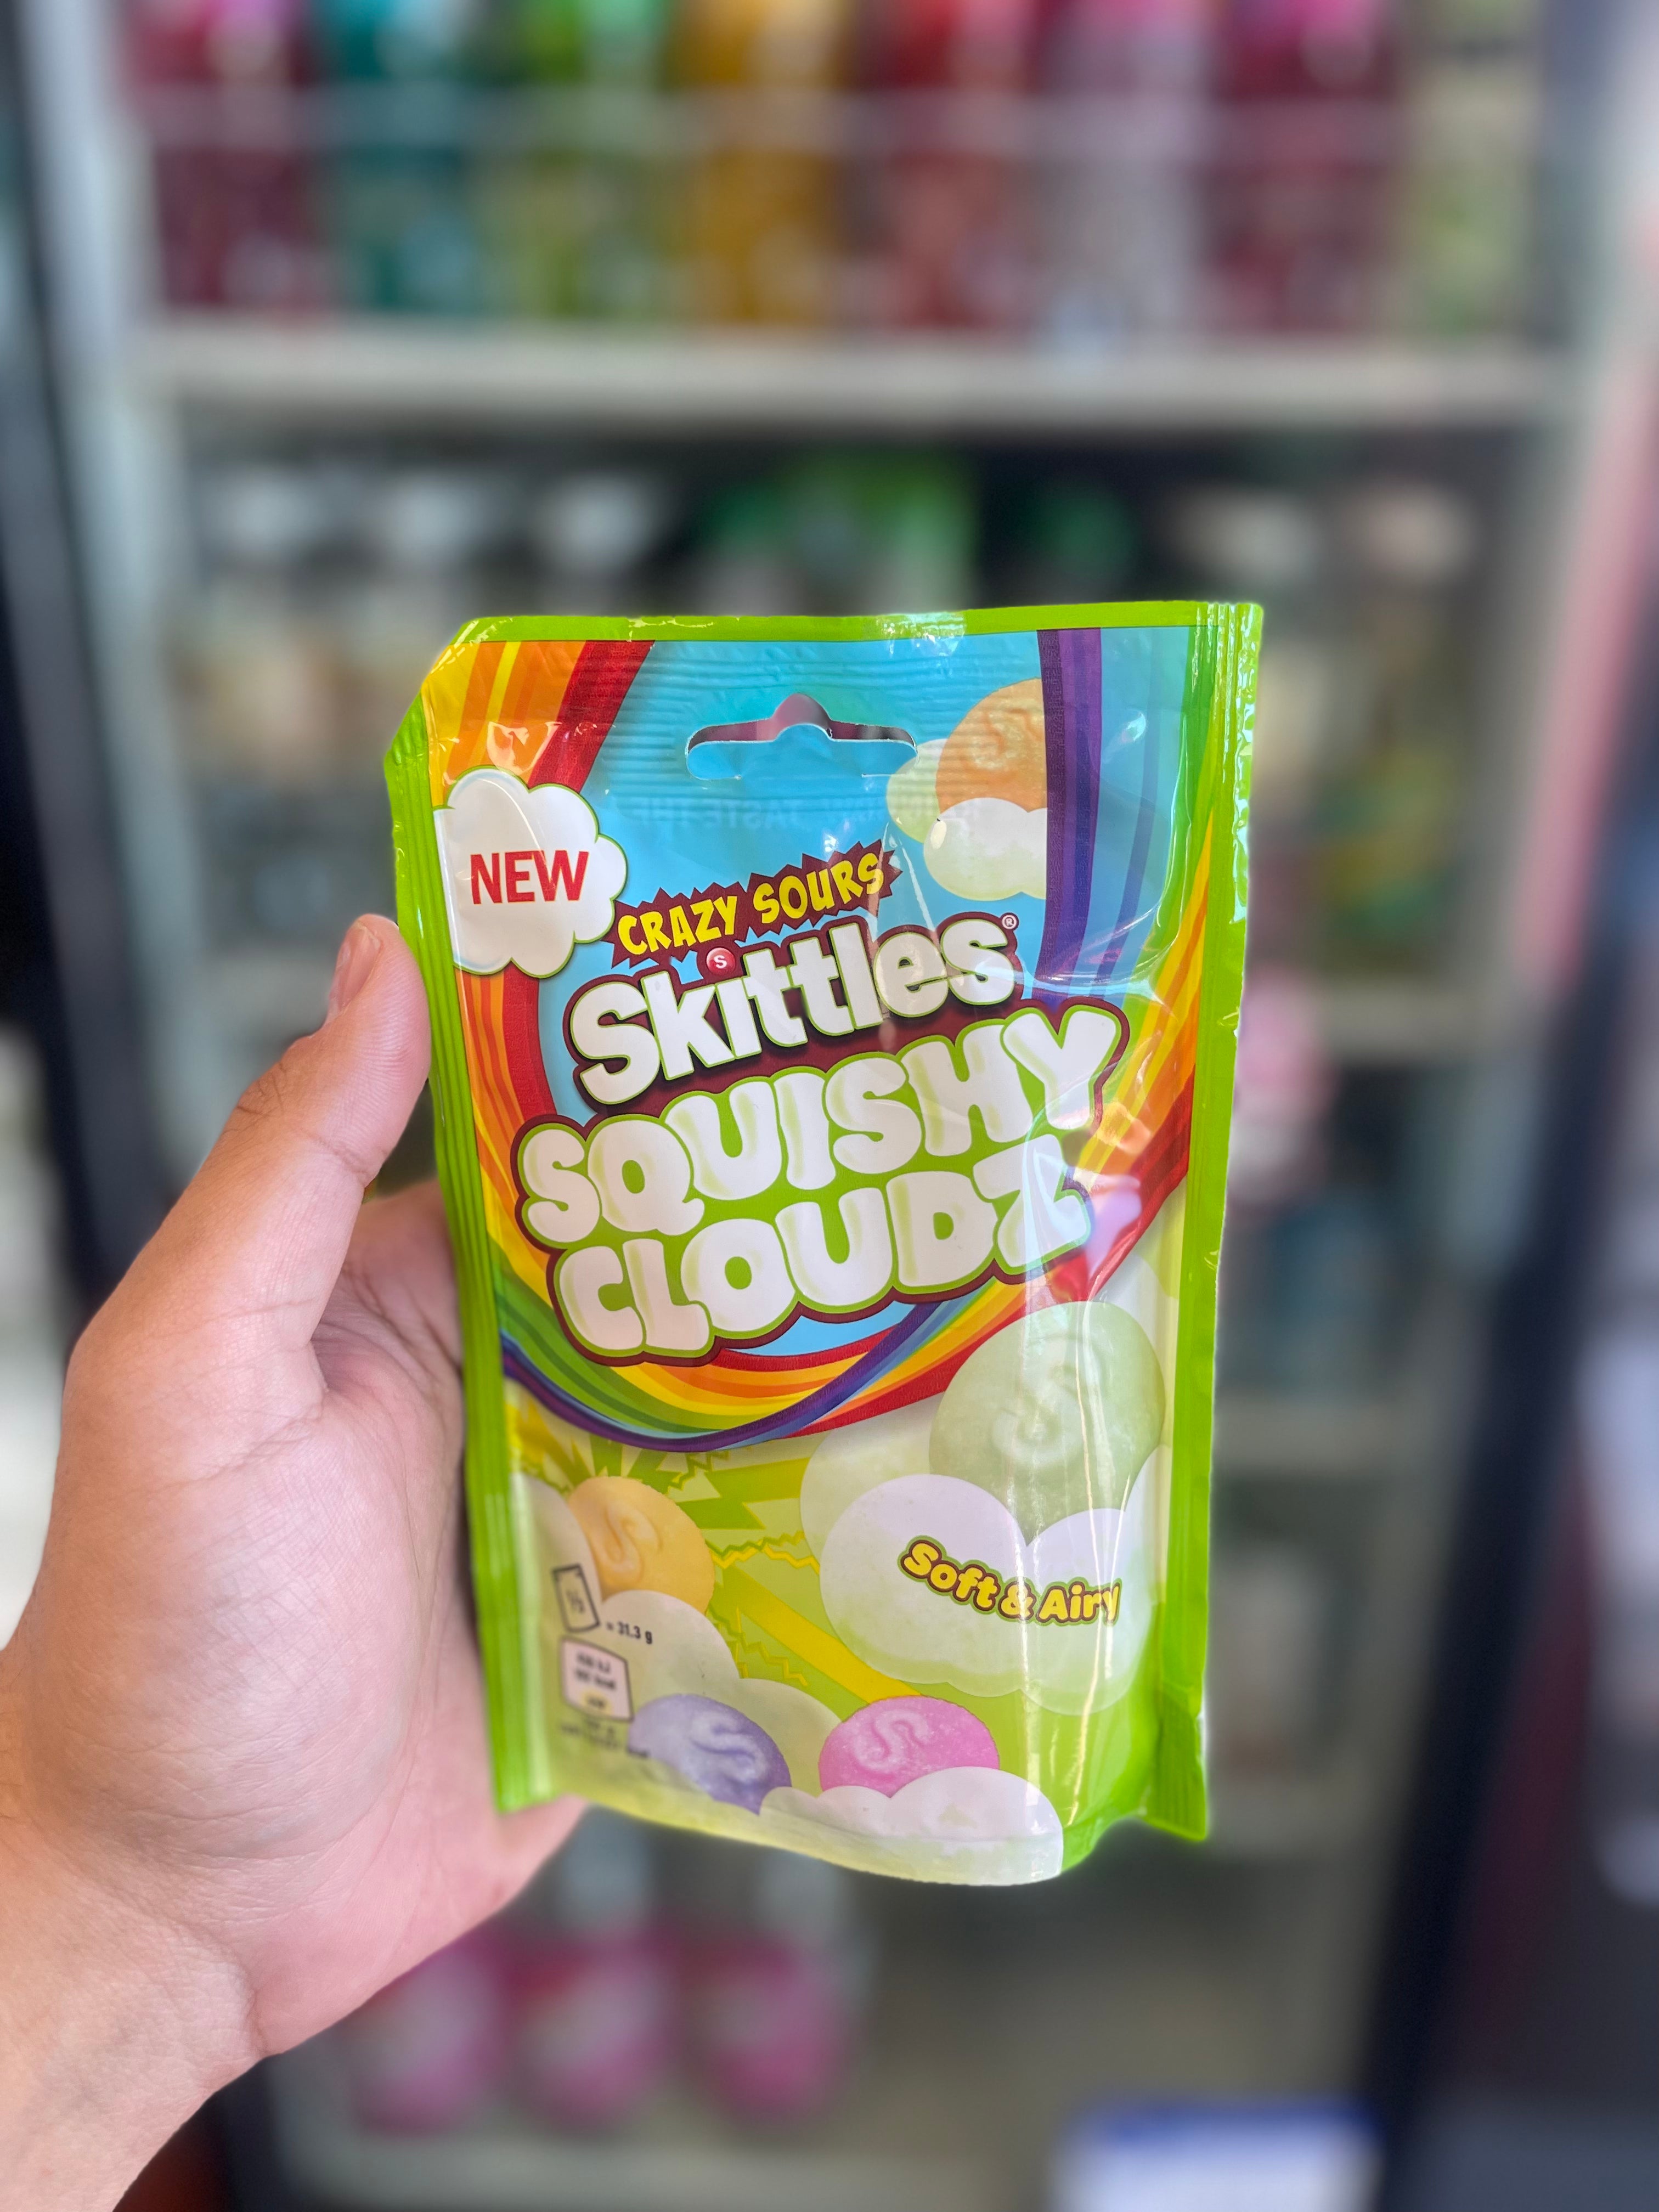 Skittles sour squishy clouds “Uk”